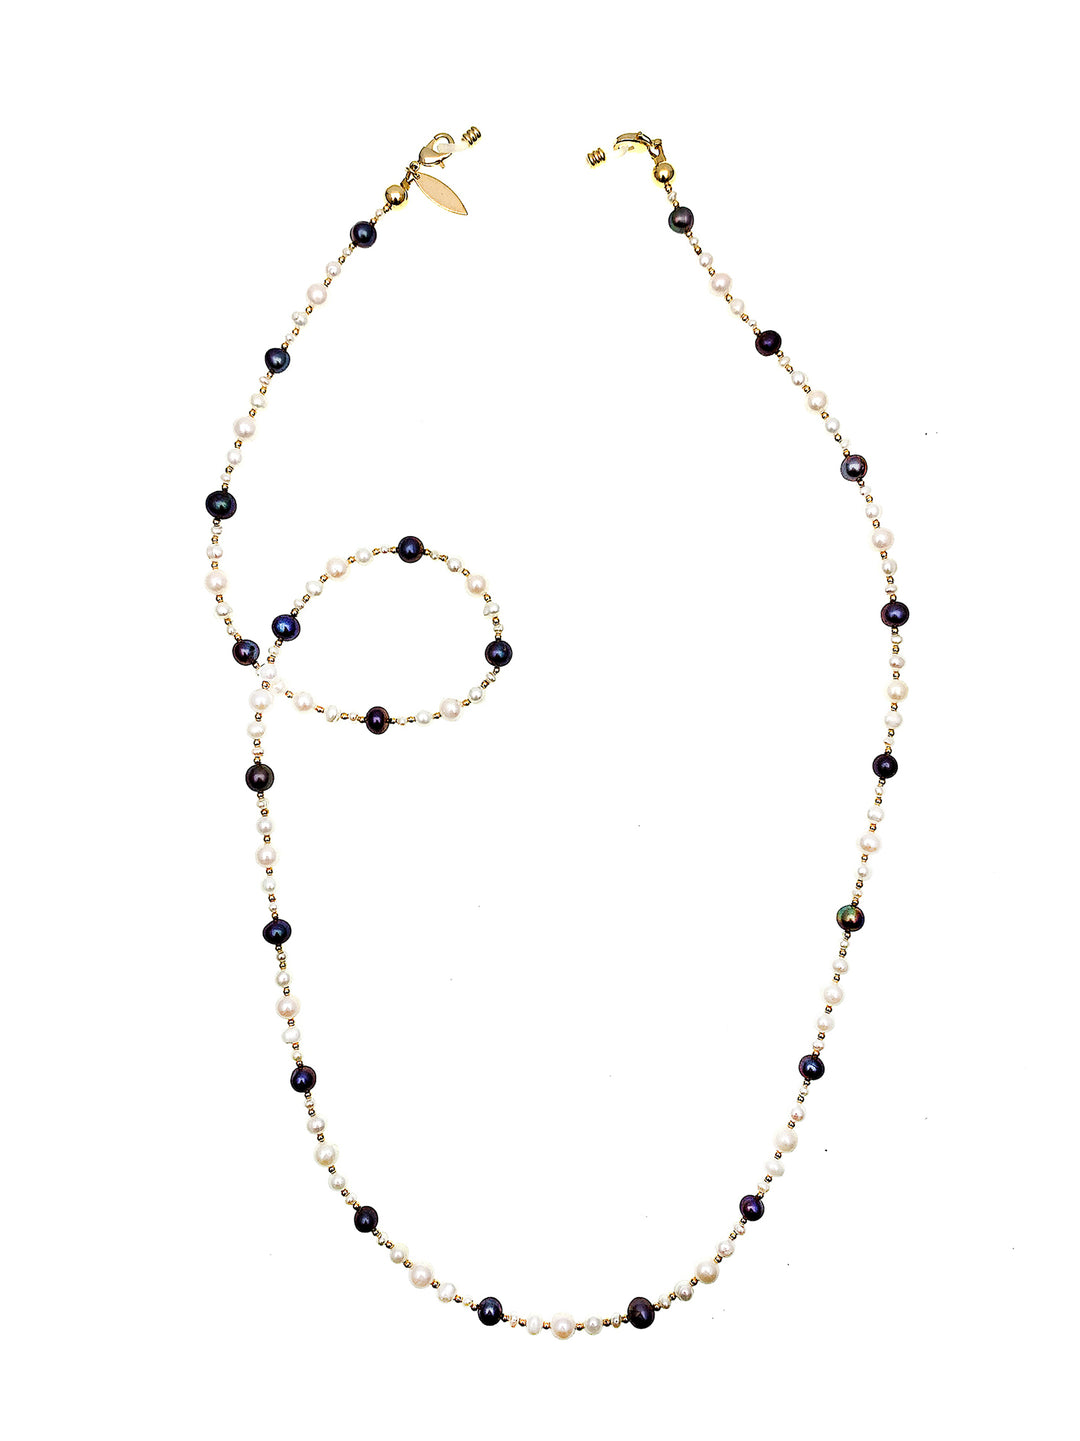 Freshwater Pearls With Black Pearls Glasses Chain FN020 - FARRA